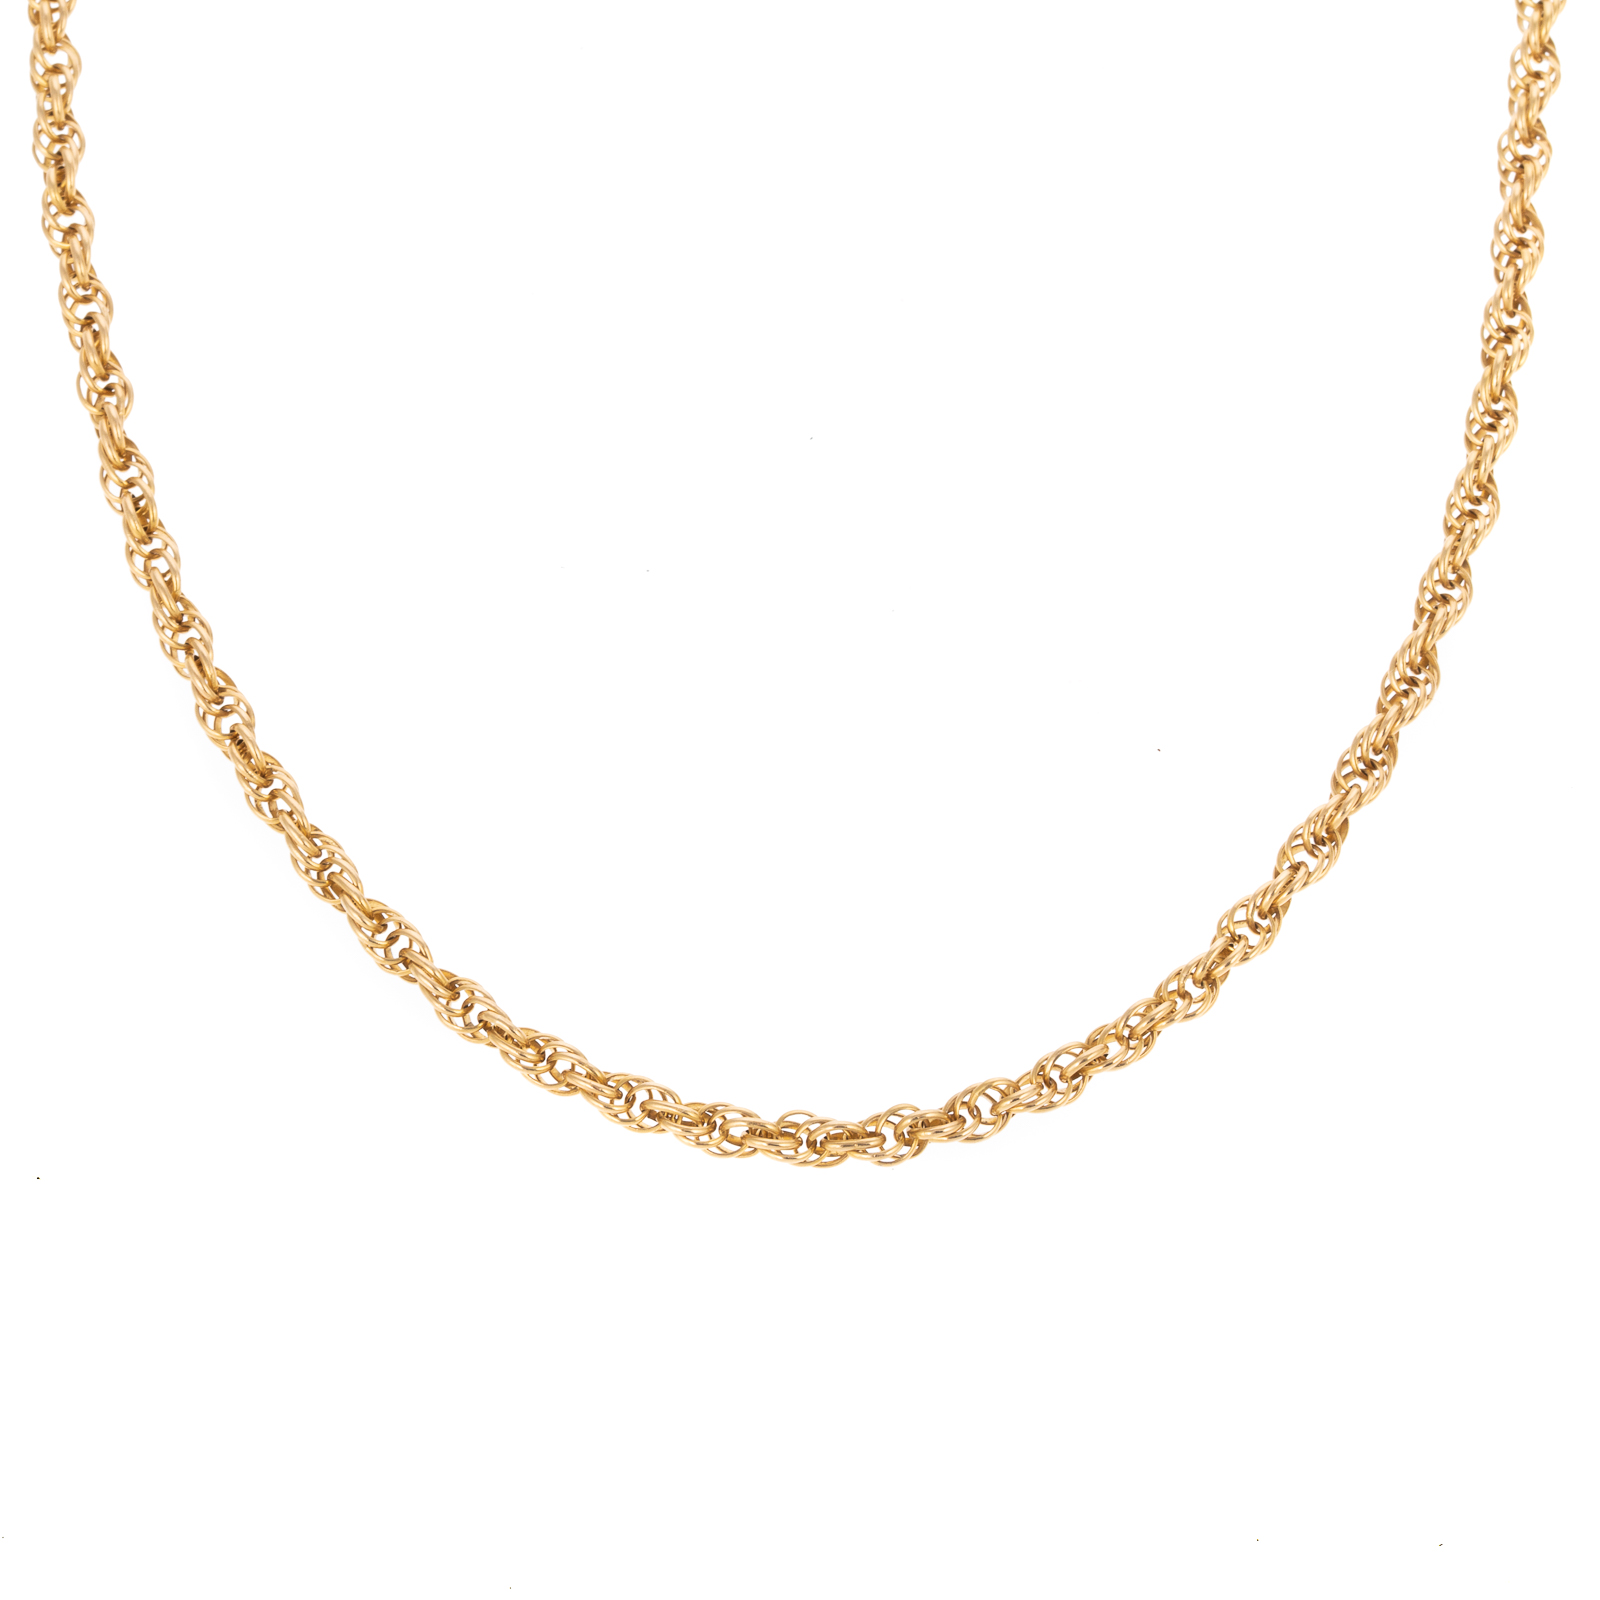 A 14K YELLOW GOLD TWISTED ROPE 2878ef